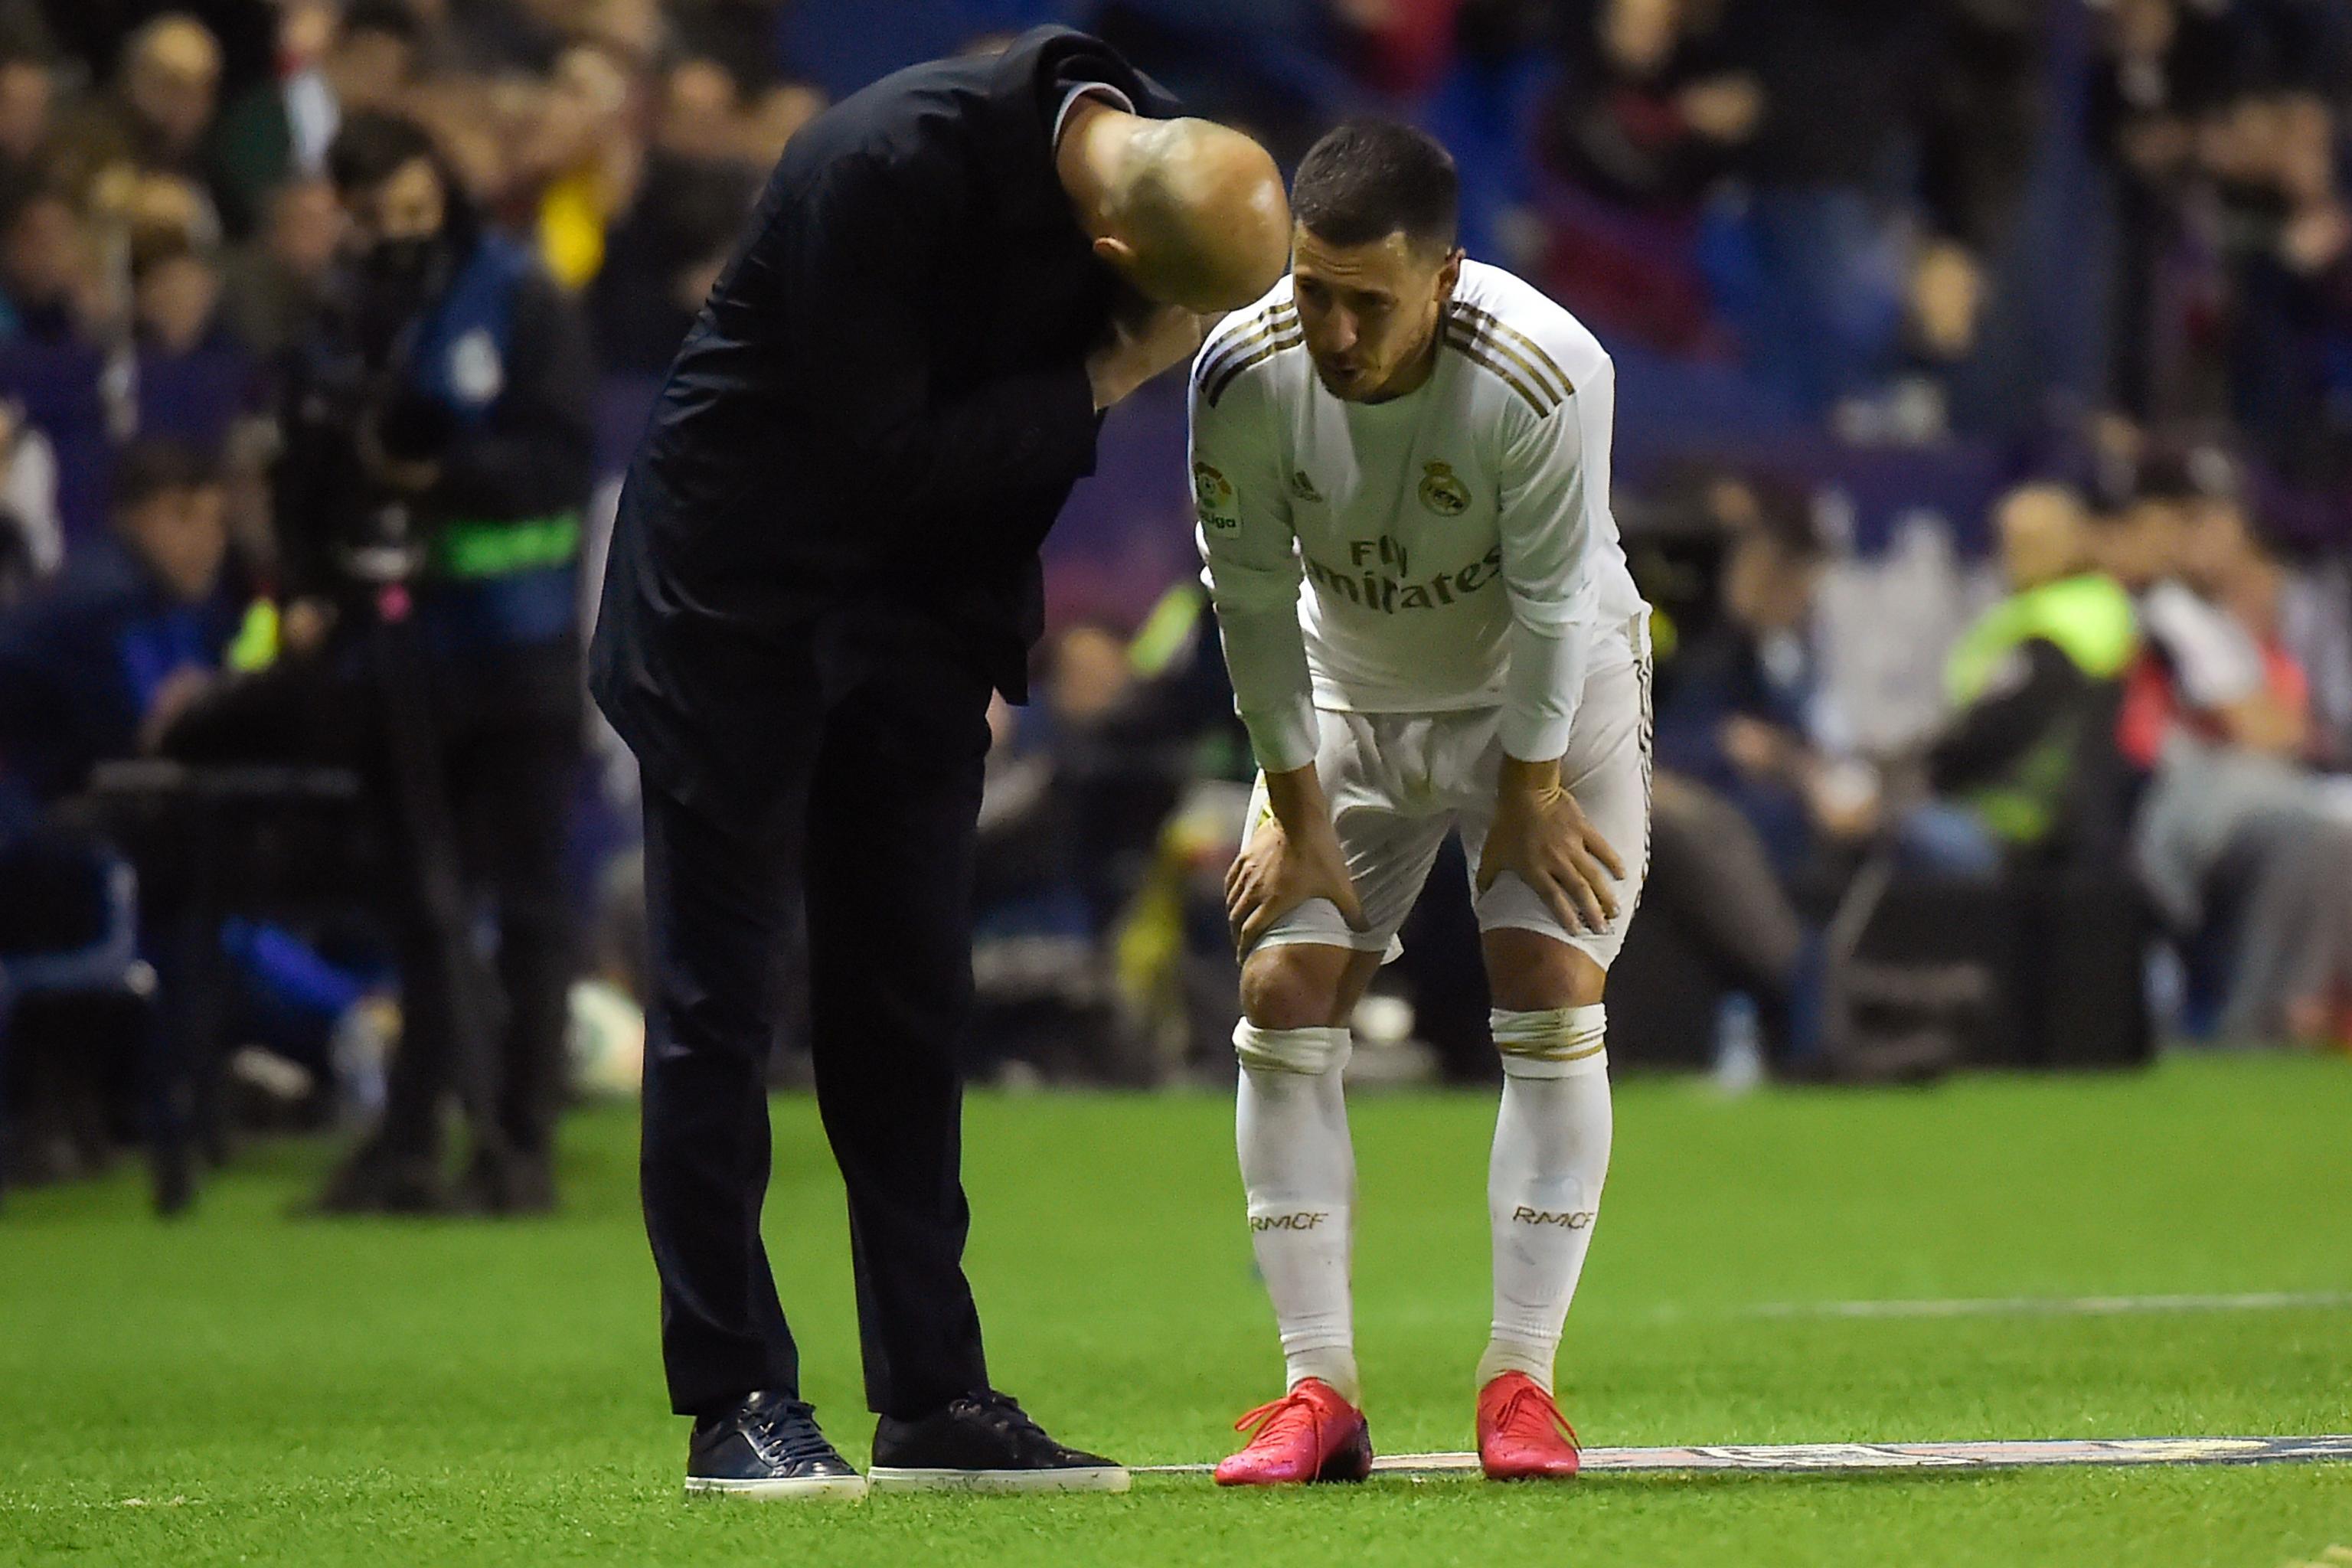 Real Madrid's Eden Hazard Exits vs. Levante After Suffering Ankle Injury | Bleacher Report | Latest News, Videos and Highlights